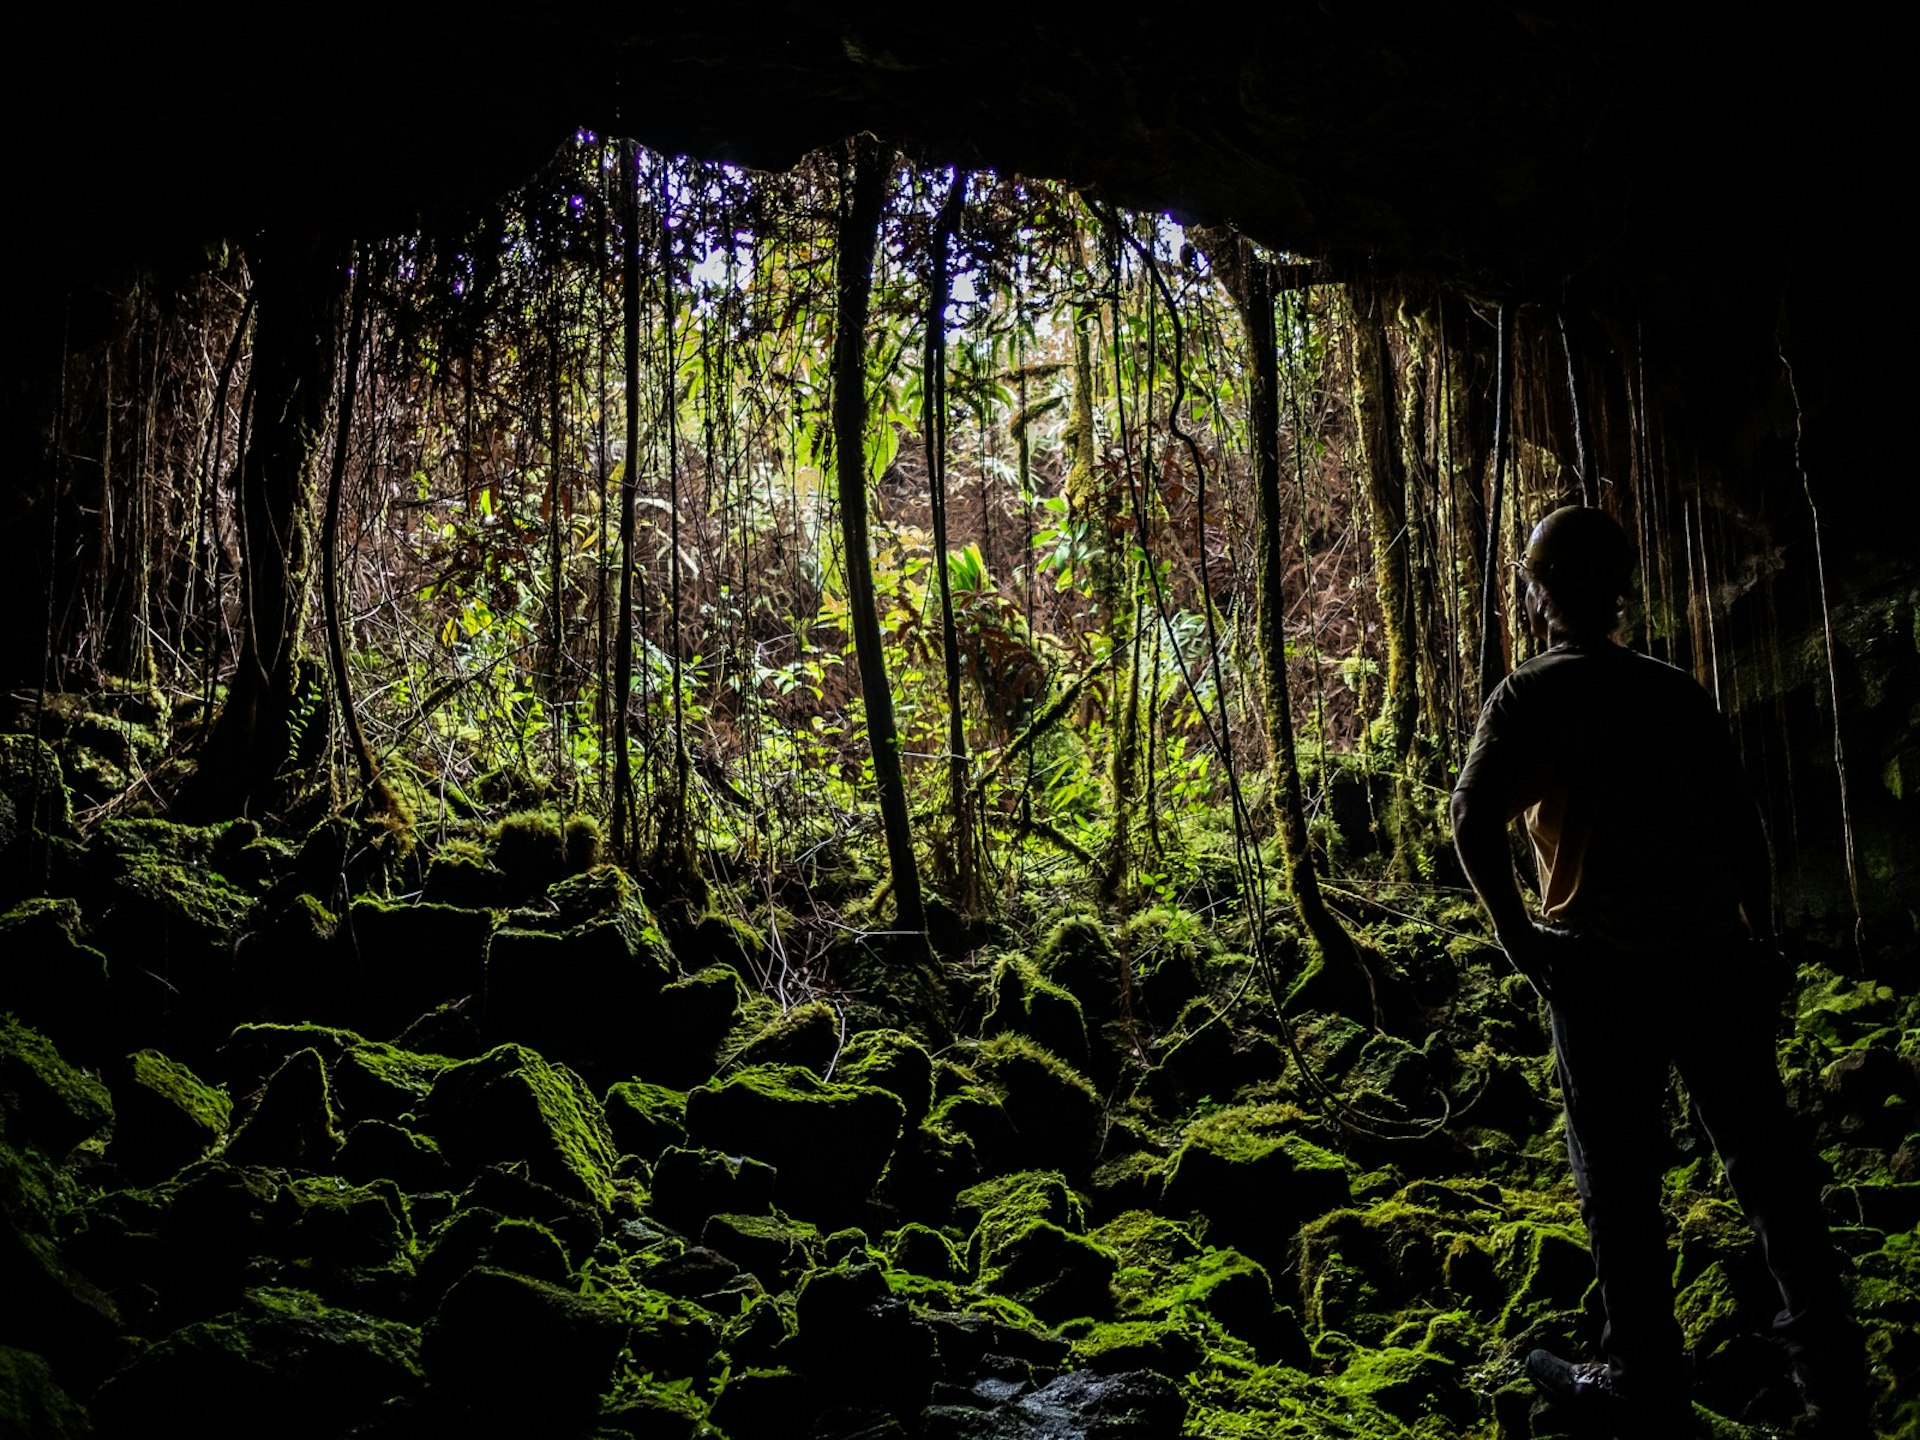 A lush jungle landscape is seen from inside Kazumura Cave as a man's silhouette is in the foreground